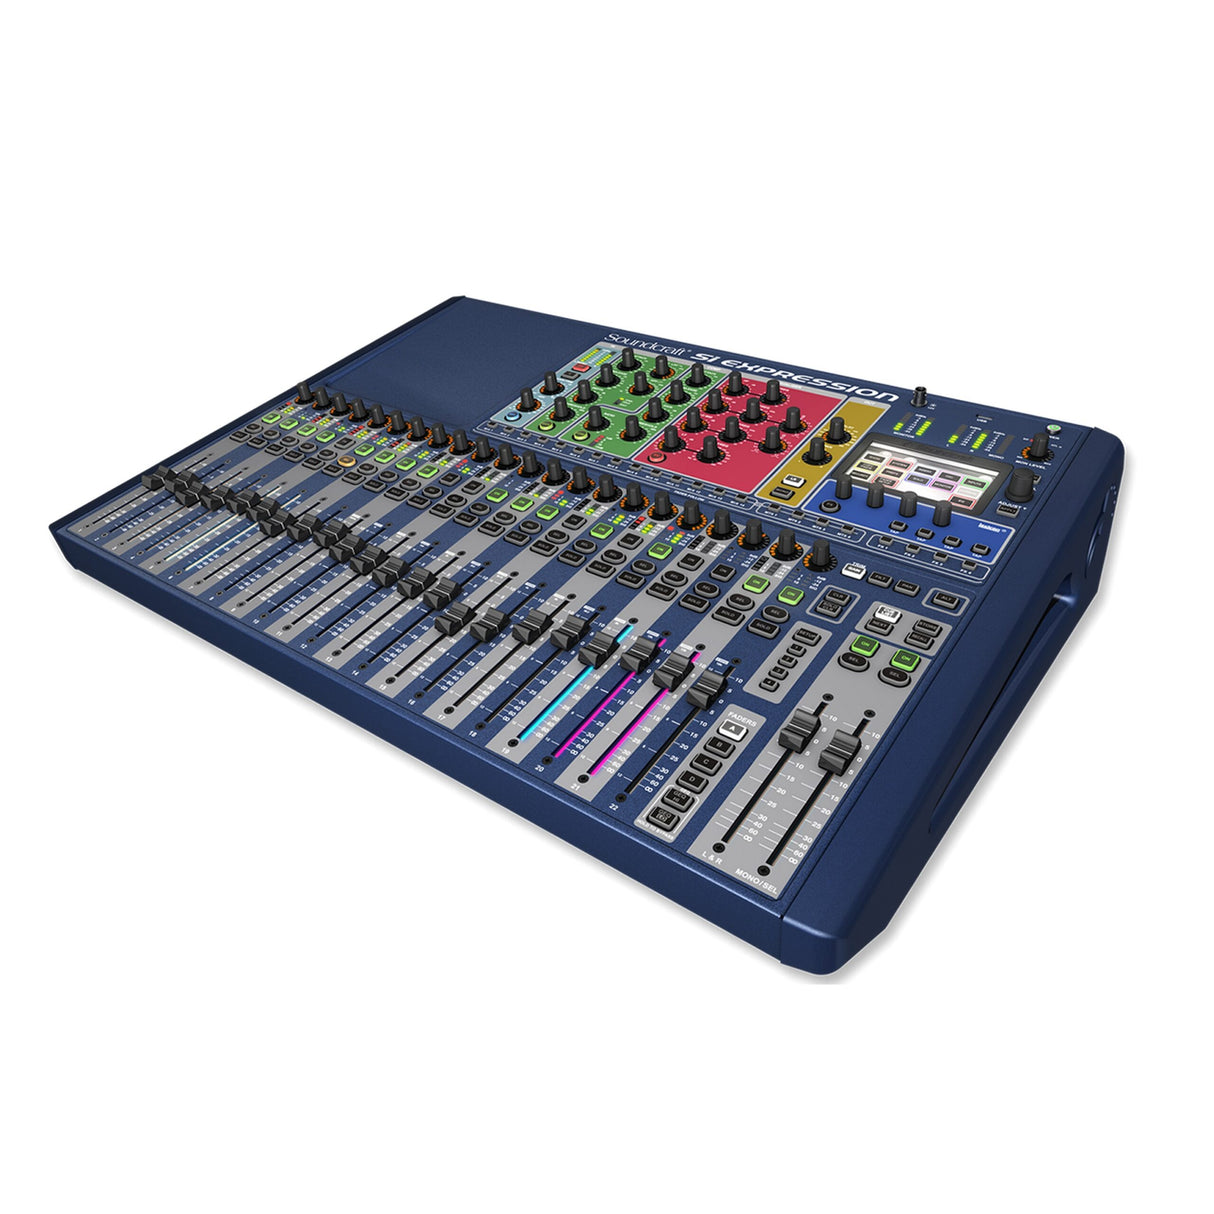 Soundcraft Si Expression 2 24-Channel Digital Console